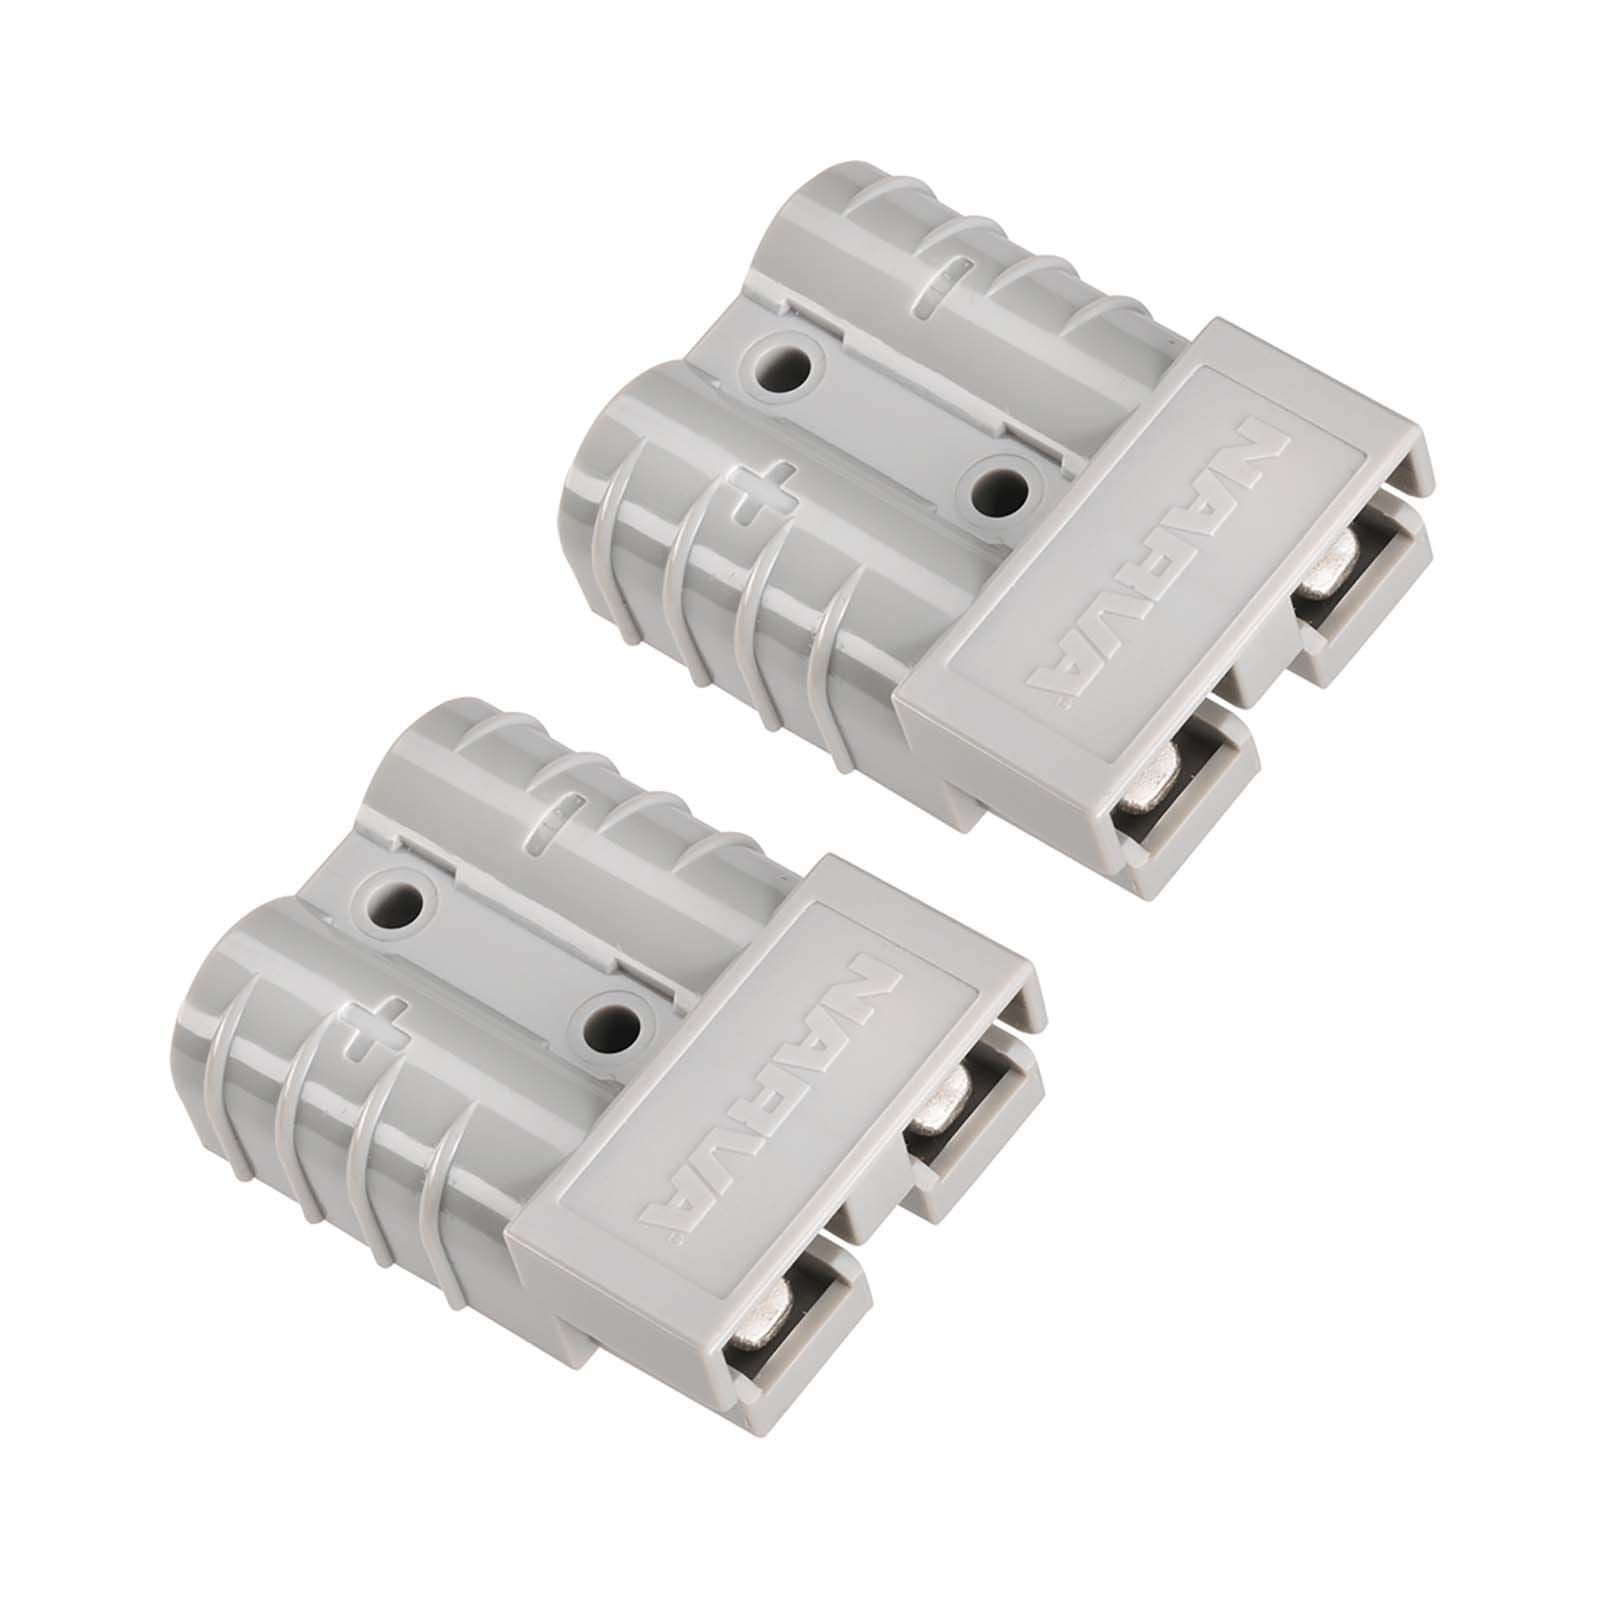 HEAVY-DUTY 50 AMP CONNECTOR HOUSING GREY With COPPER TERMINALS TWIN PACK